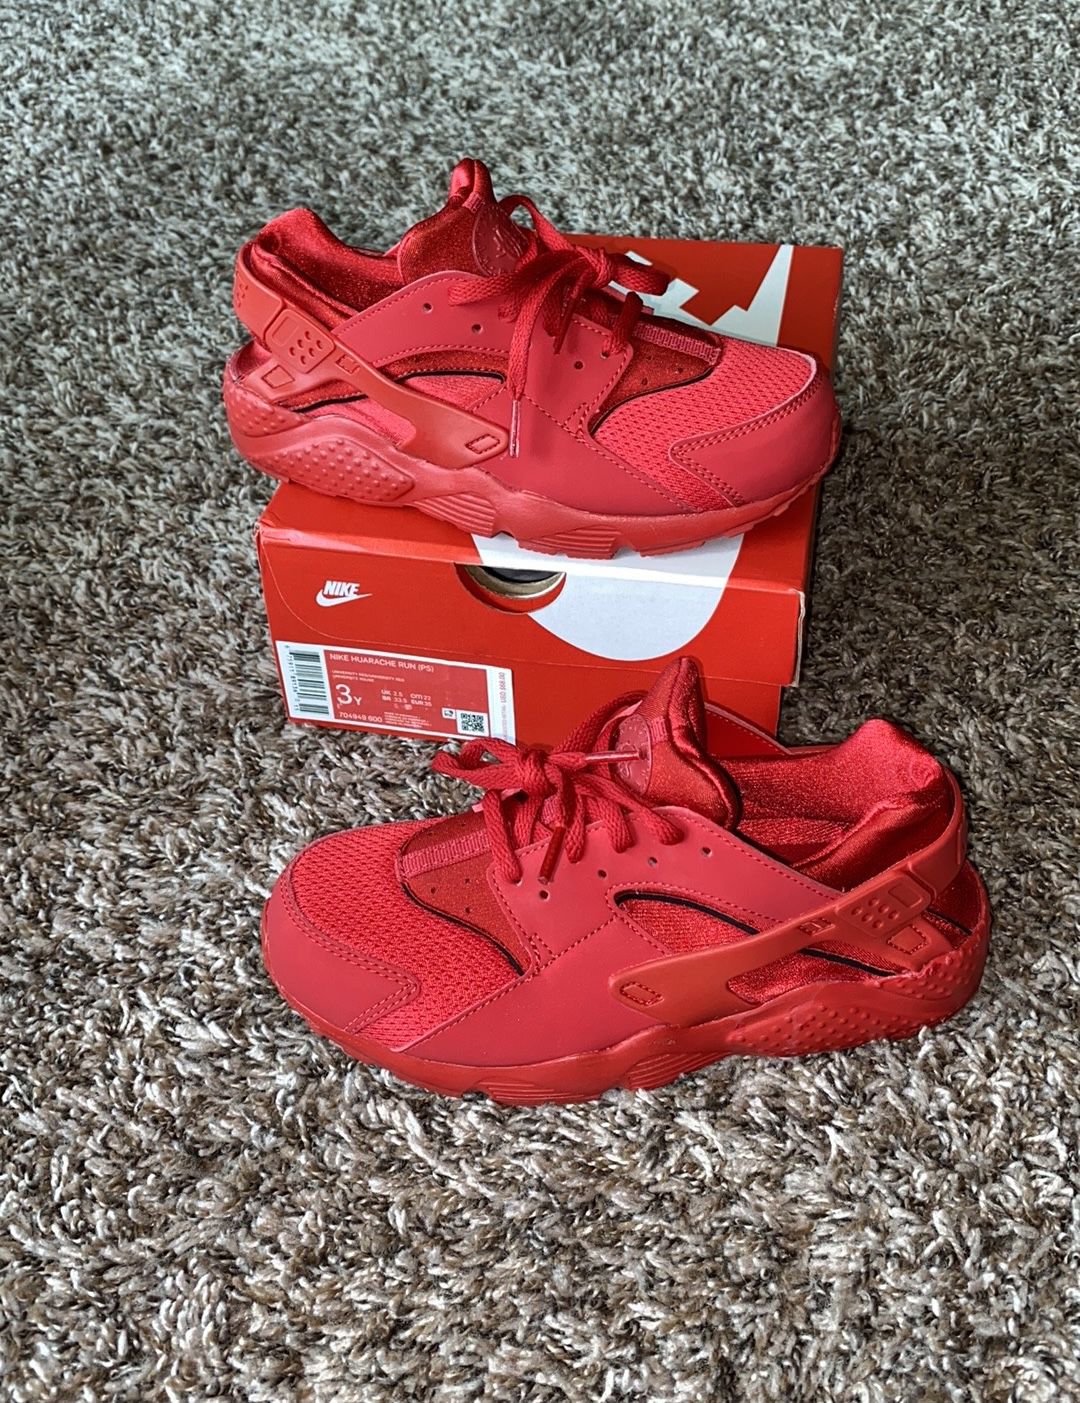 Classic Nike Huarache PS Red Shoes New With Box for Sale Oklahoma OK - OfferUp